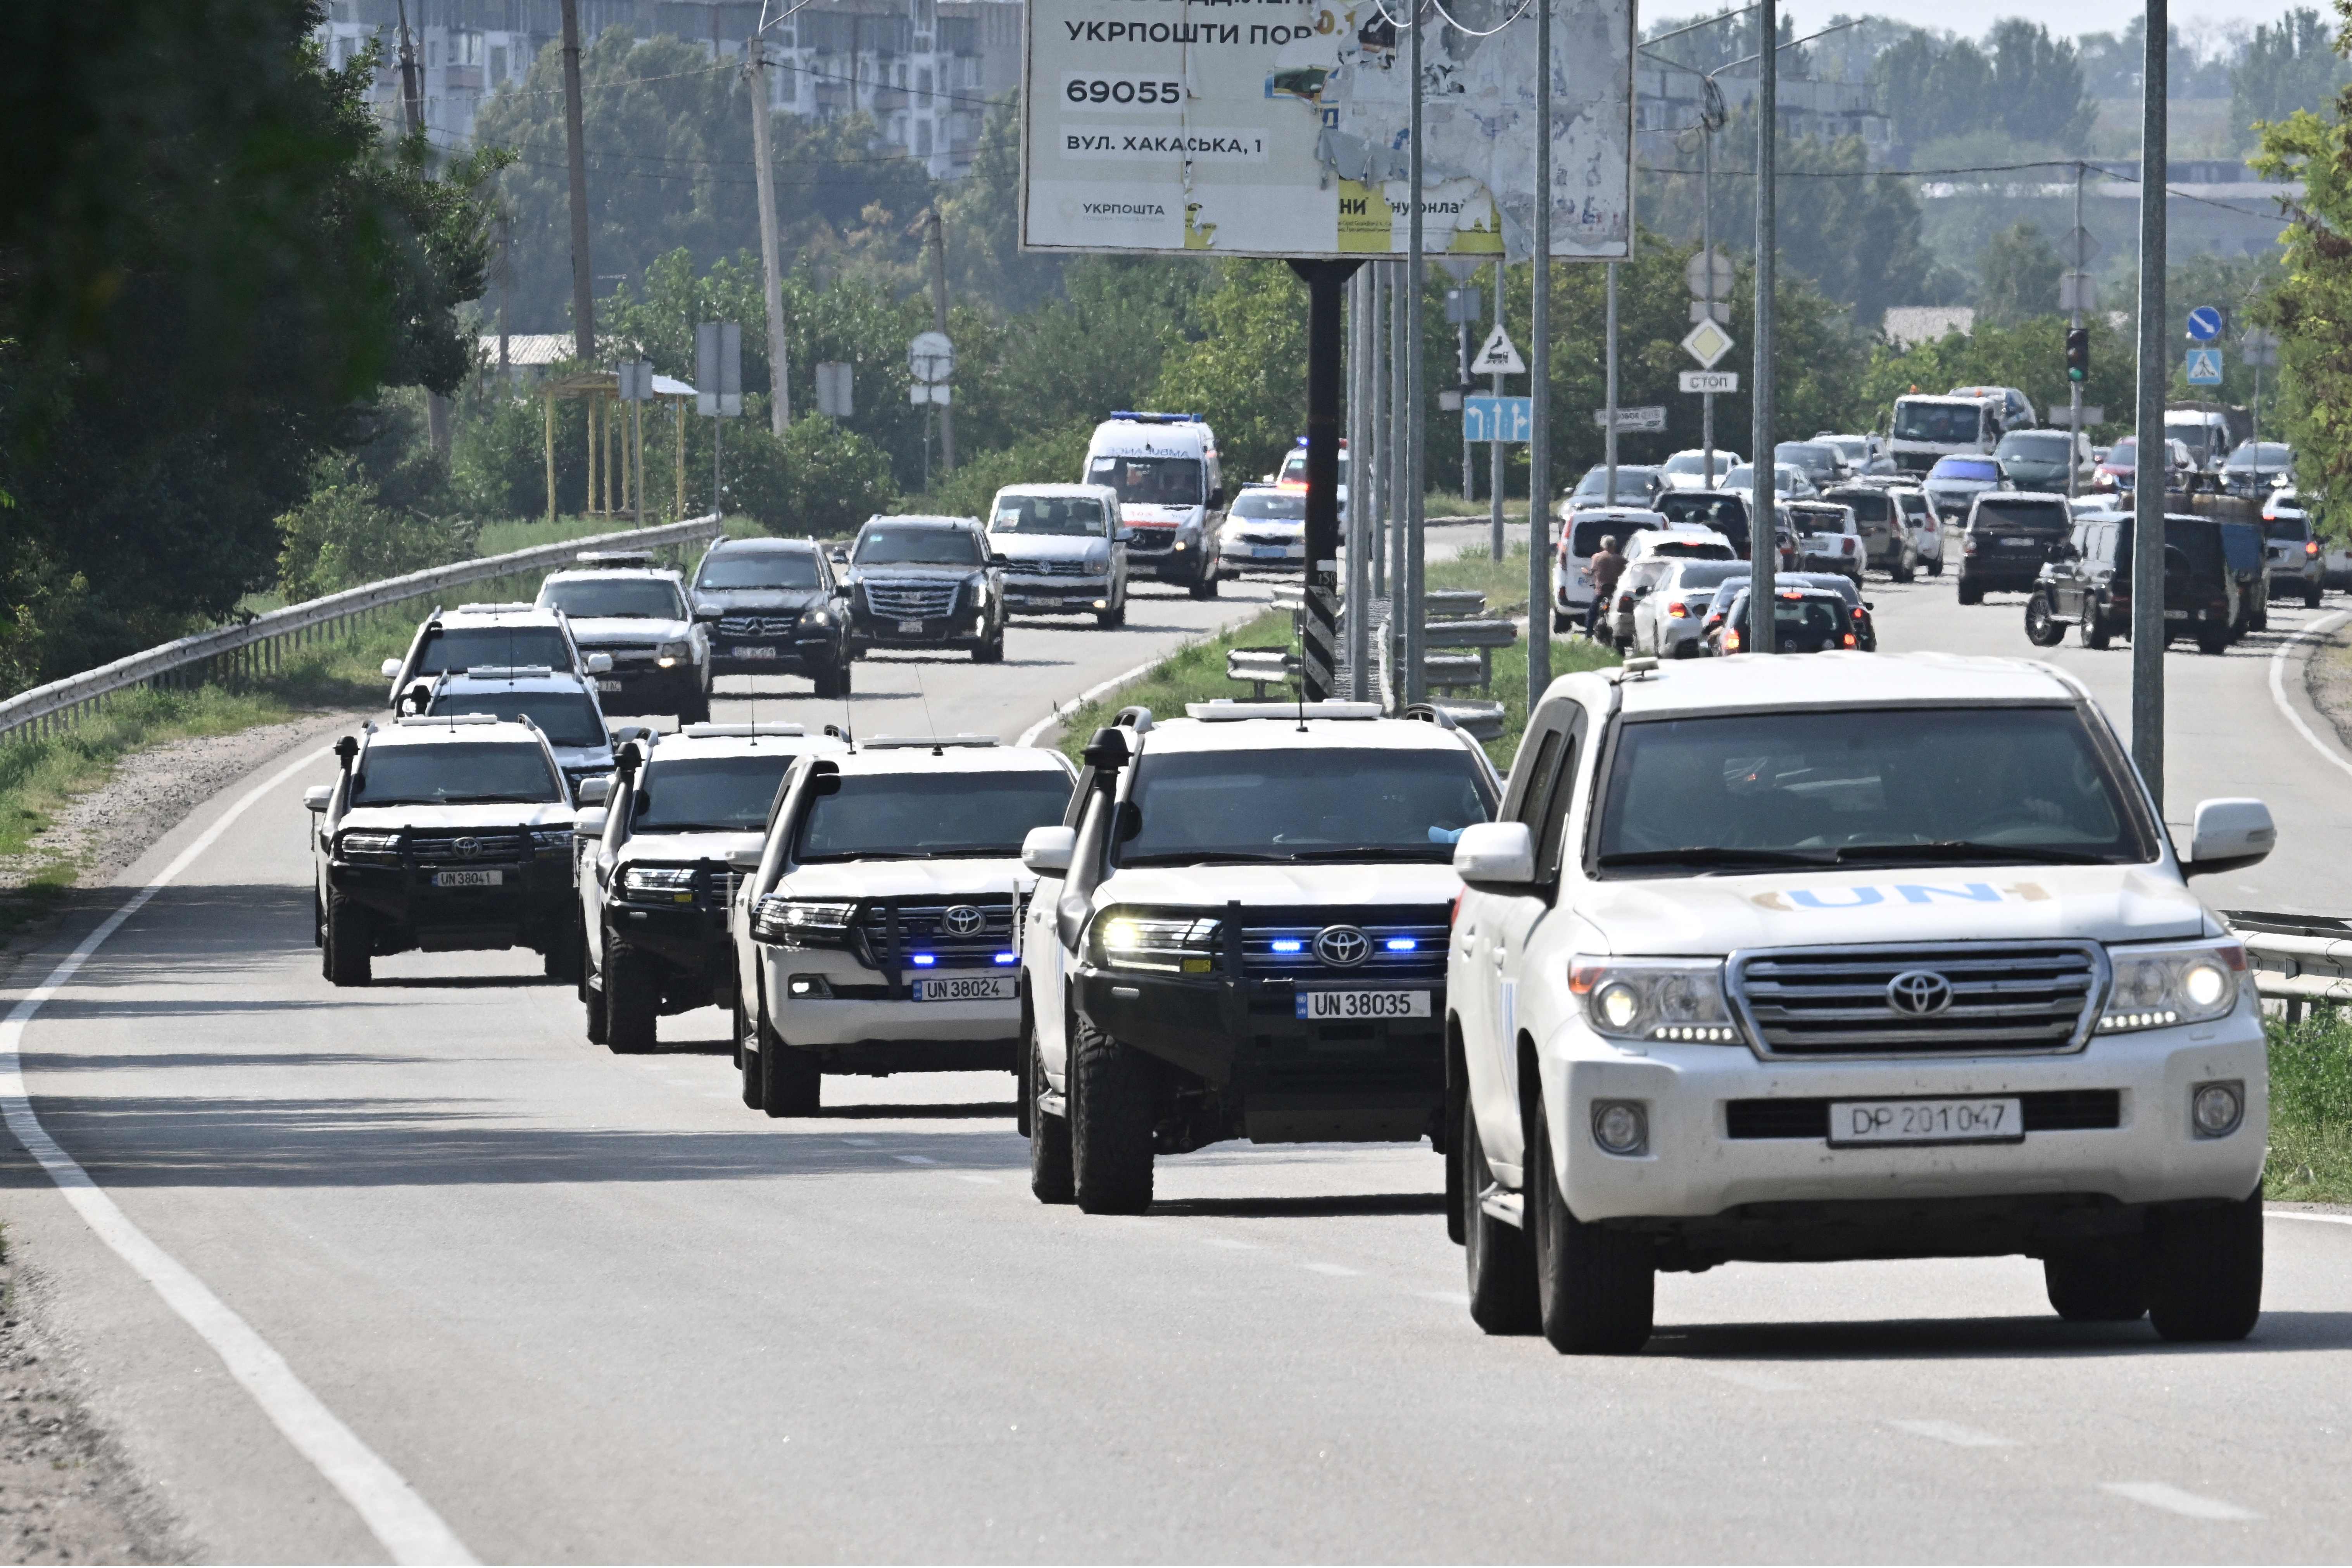 IAEA nuclear inspectors are escorted to the Zaporizhzhia site by UN vehicles on Wednesday